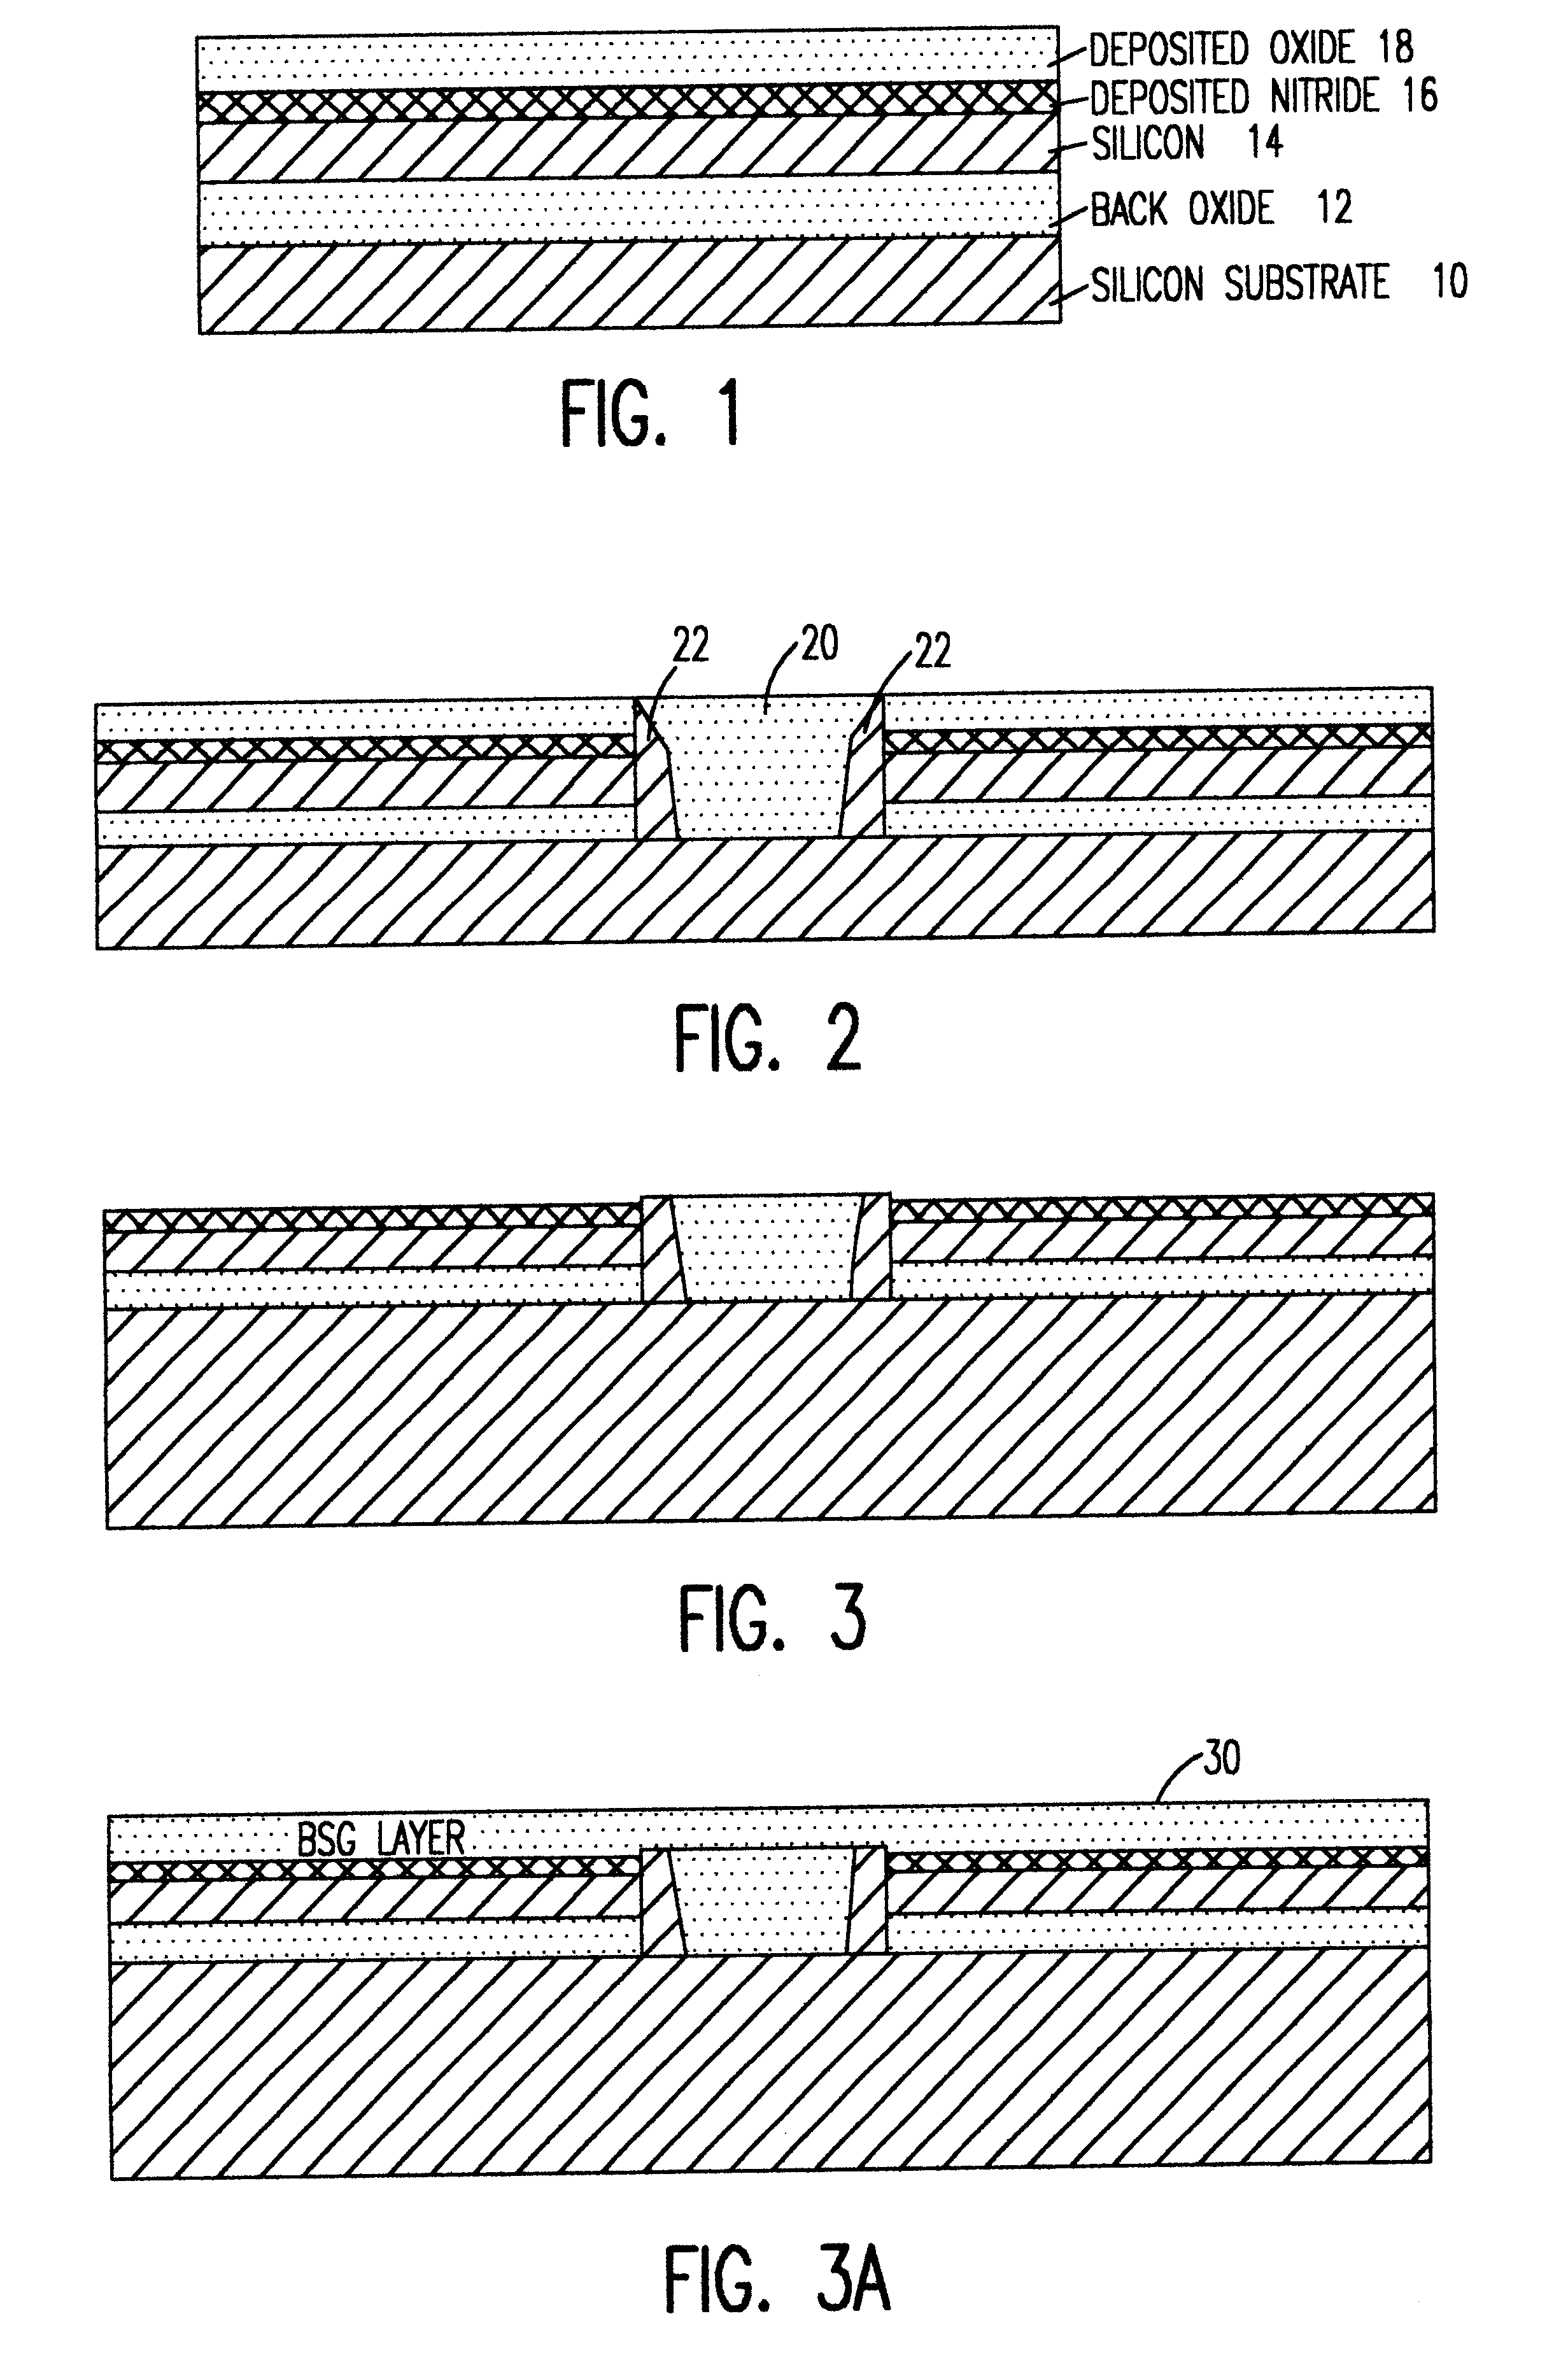 Structures and methods of anti-fuse formation in SOI